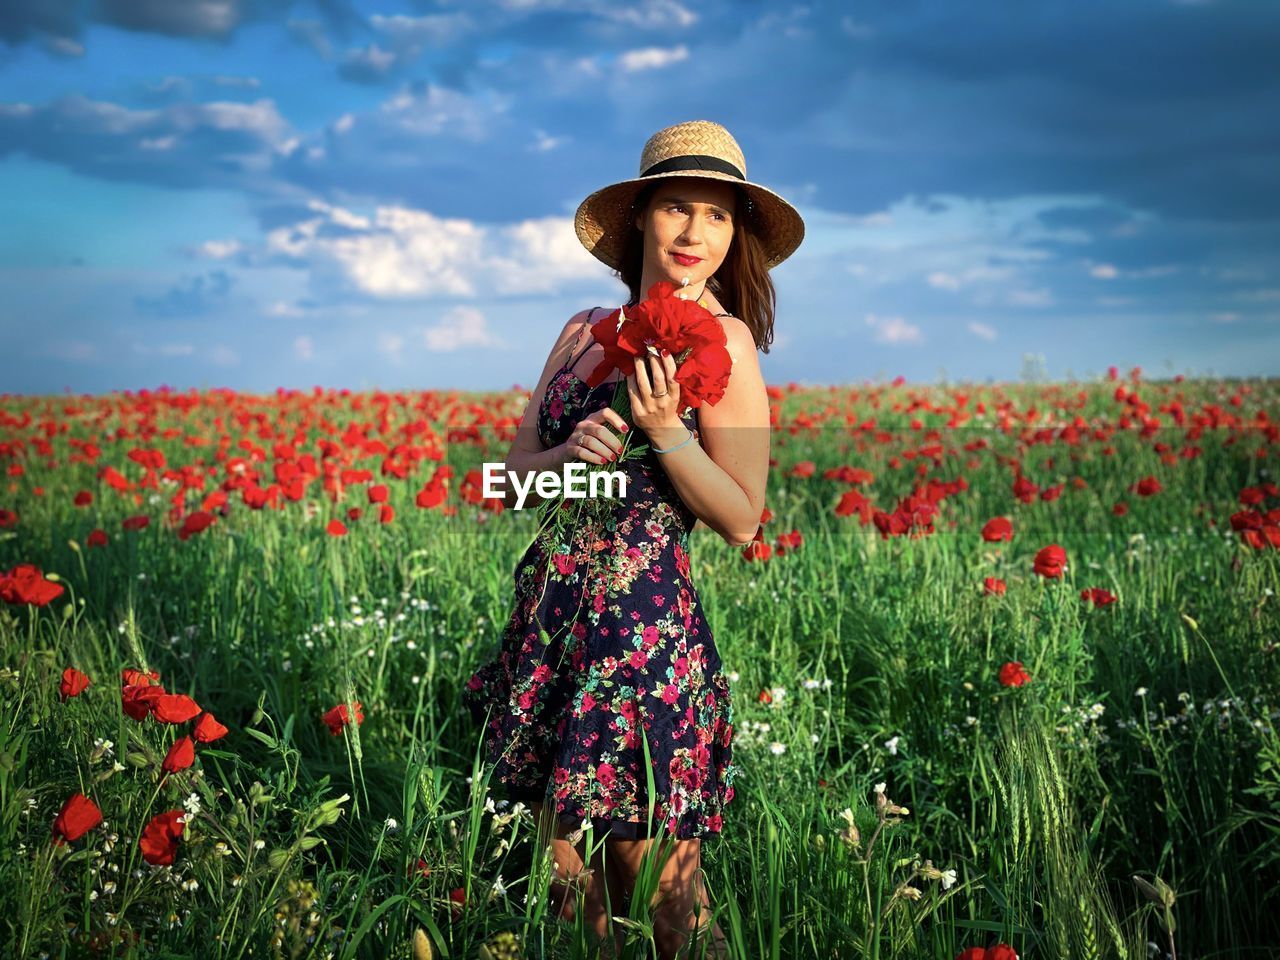 Woman wearing dress and hat holding a bouquet of poppies in a field of poppies